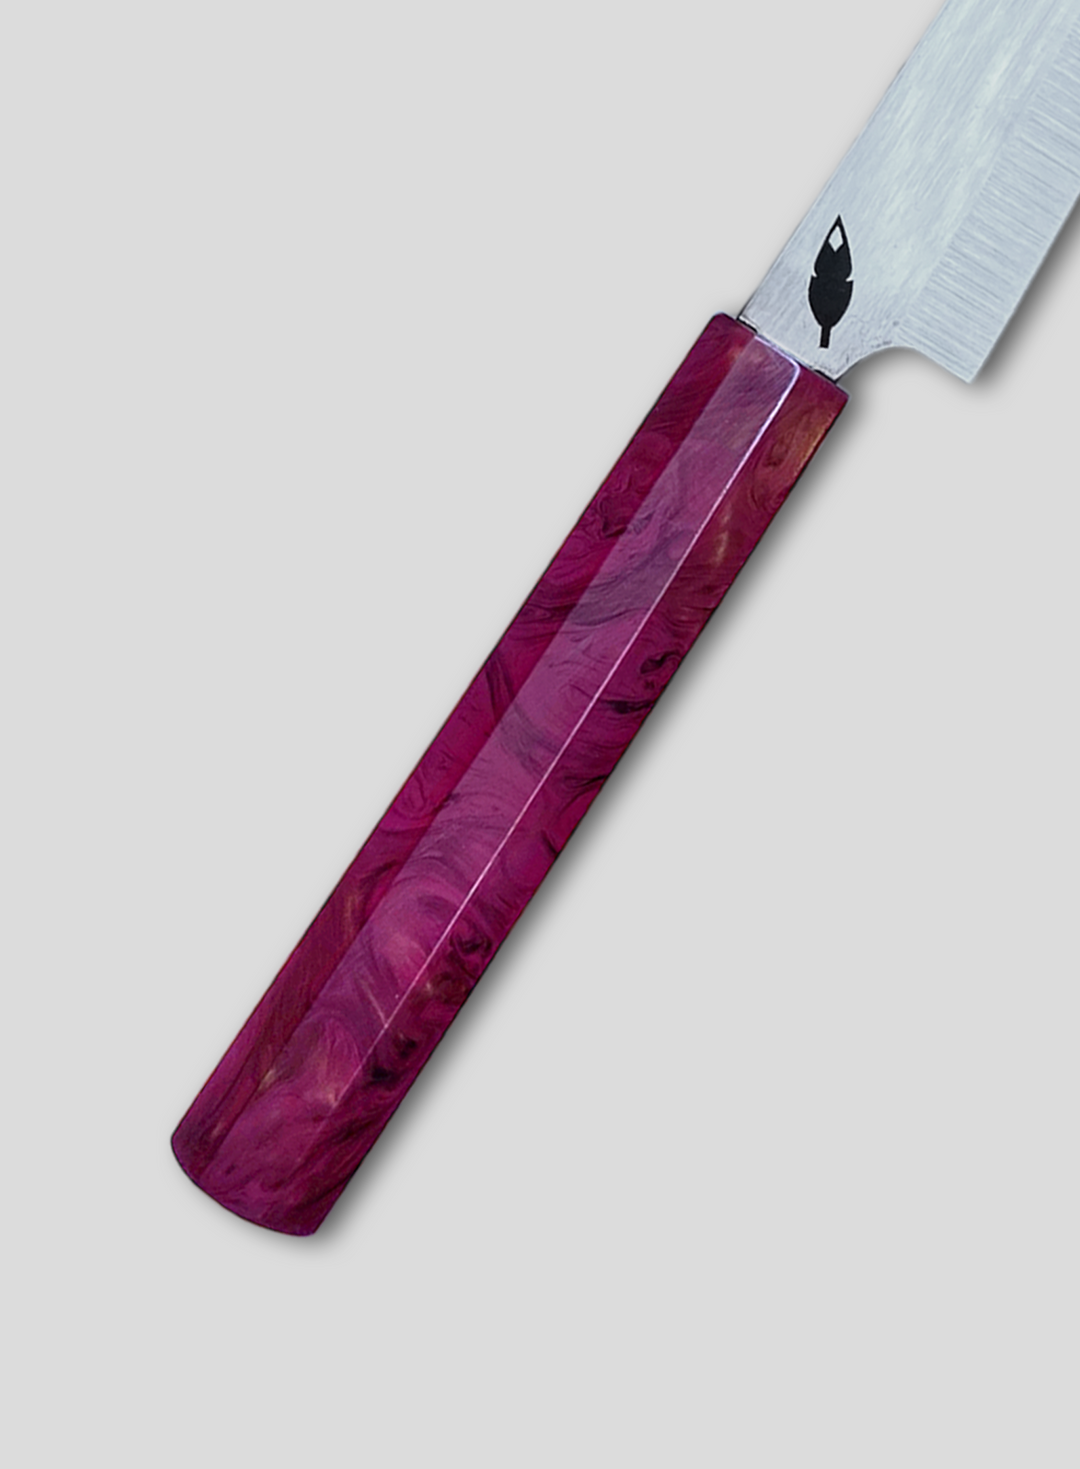 Limited Edition Enojito (Wine Resin Handle)